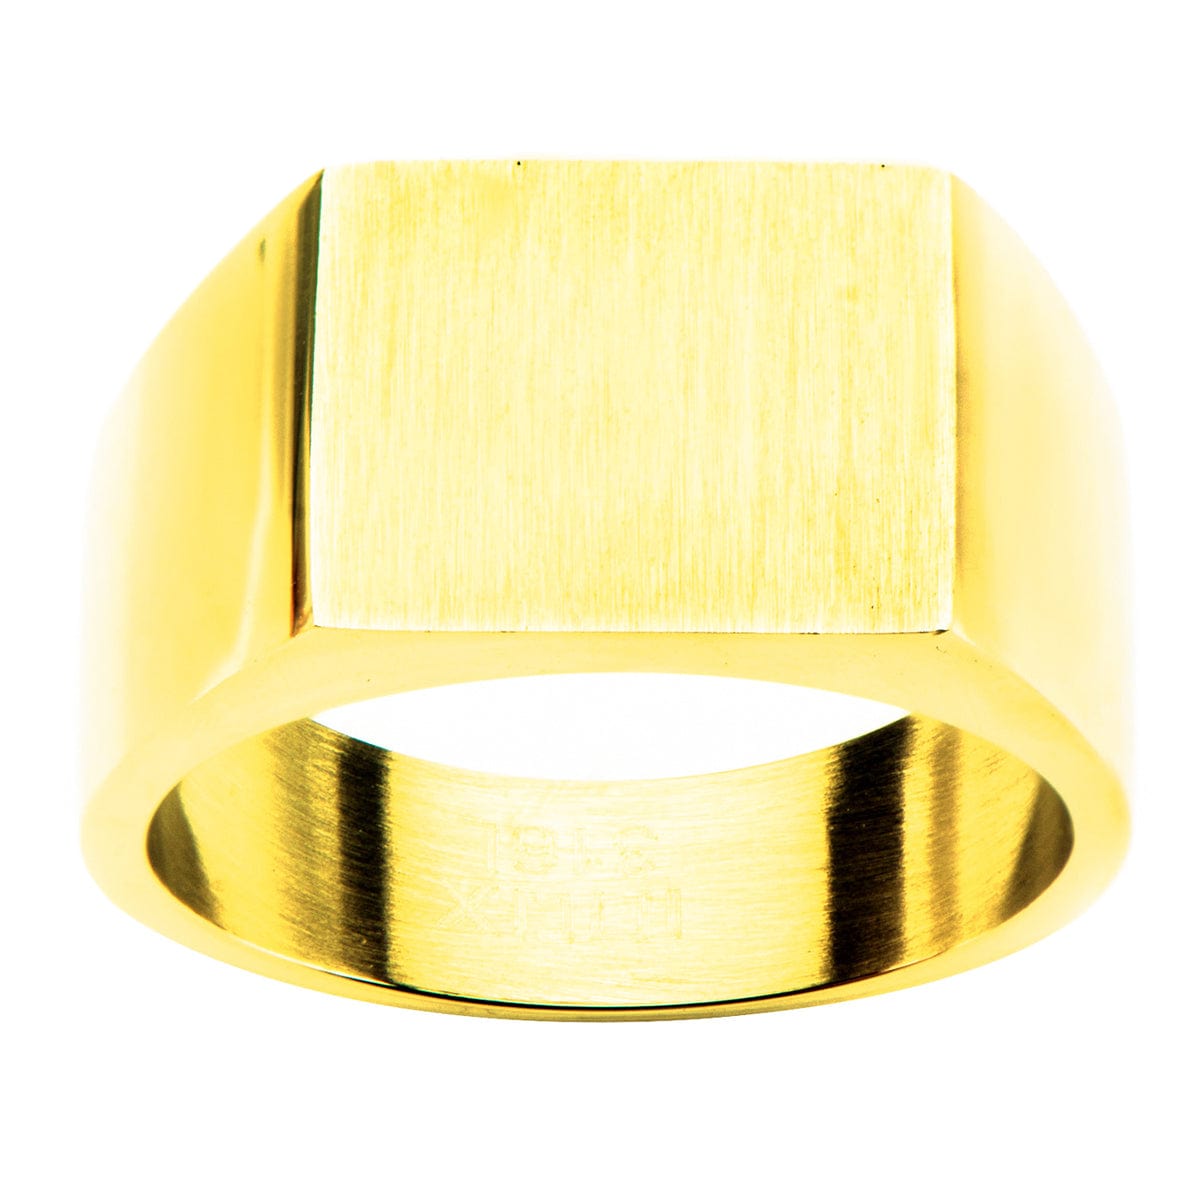 INOX JEWELRY Rings Golden Tone Stainless Steel Polished Signet Engravable Ring